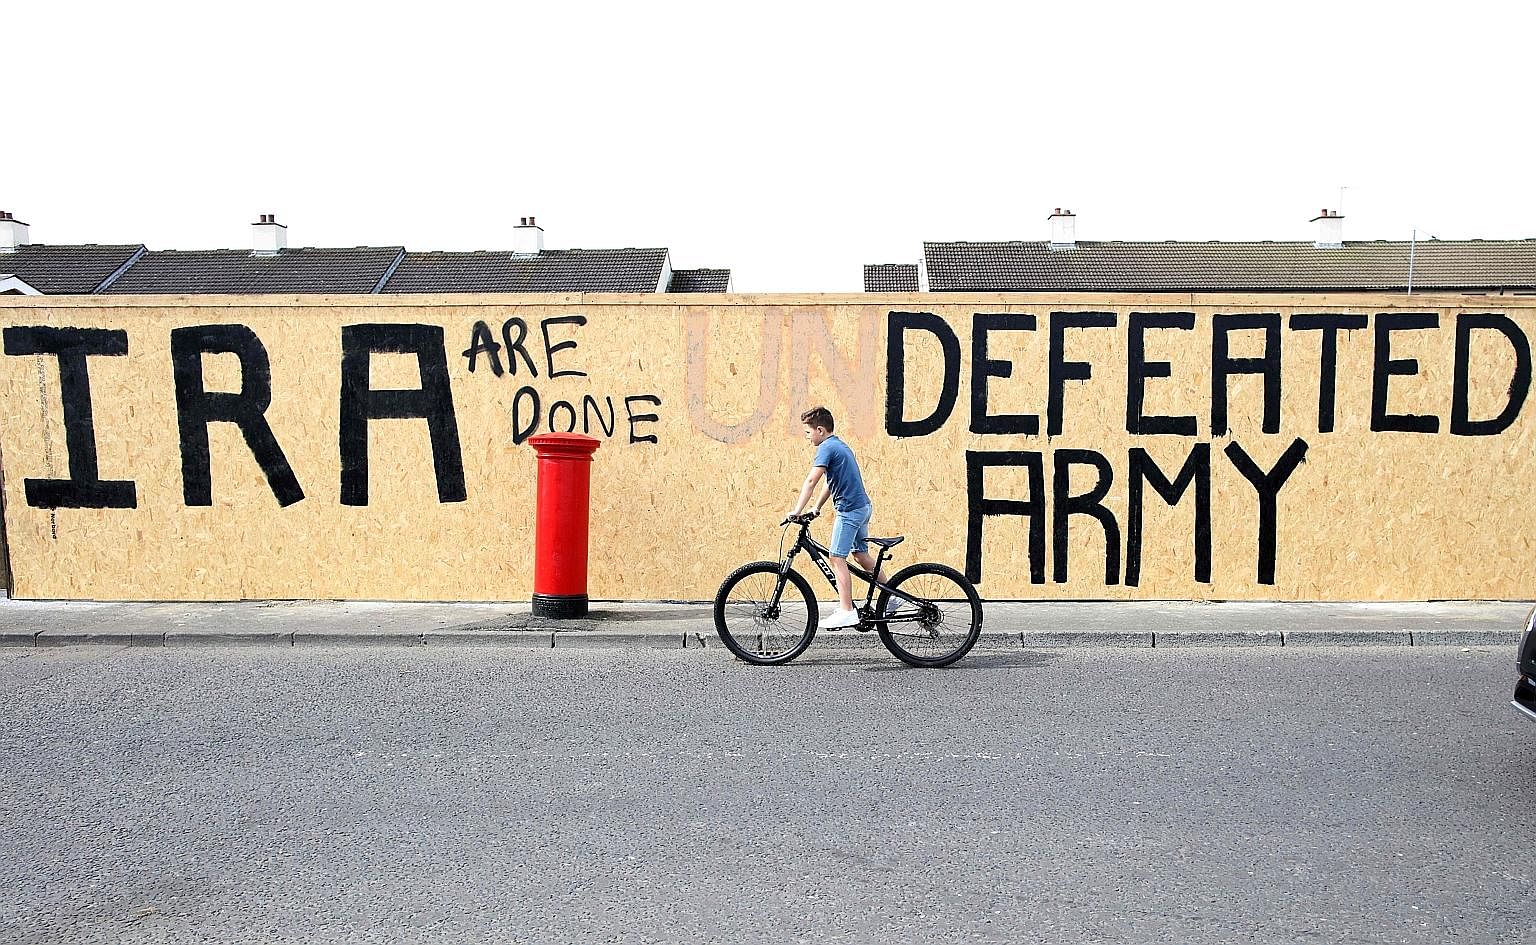 Graffiti that has been amended to "IRA are done. Defeated Army" instead of "IRA undefeated Army" in Londonderry's Creggan area, near where Ms Lyra McKee was shot last week.